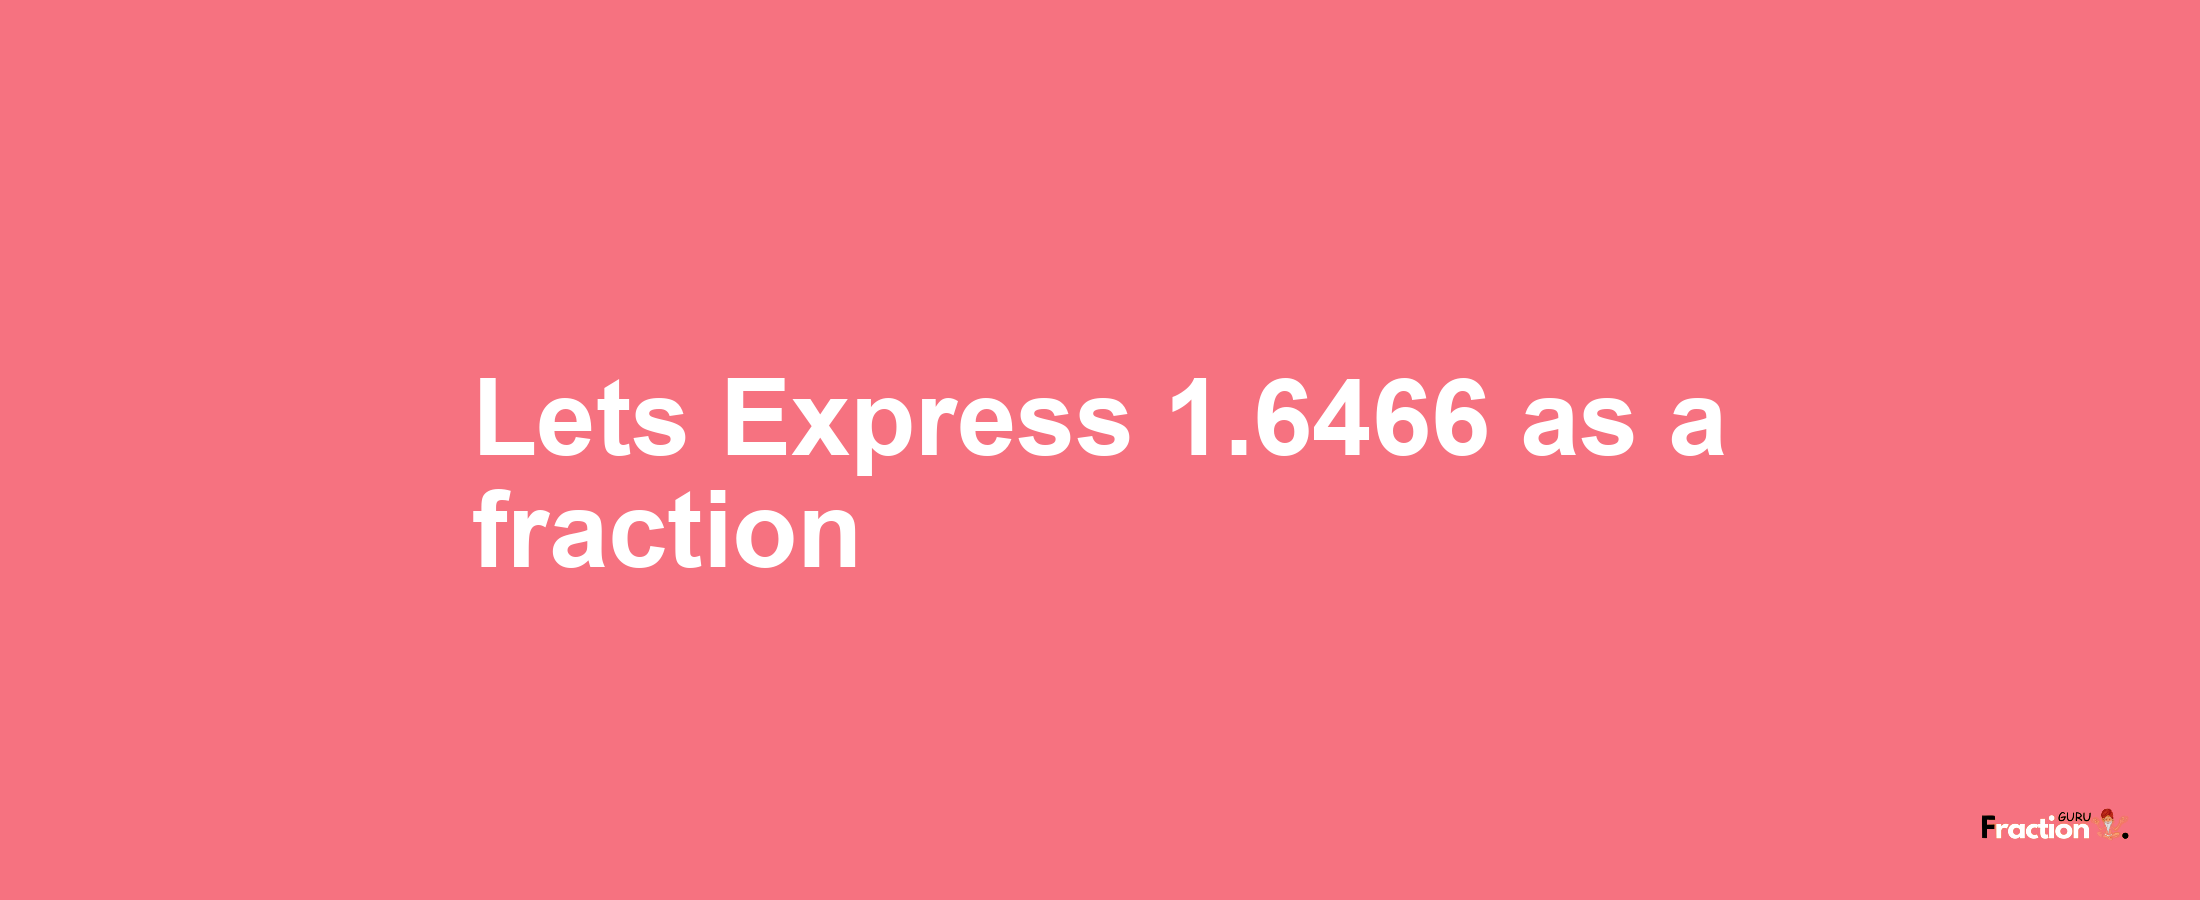 Lets Express 1.6466 as afraction